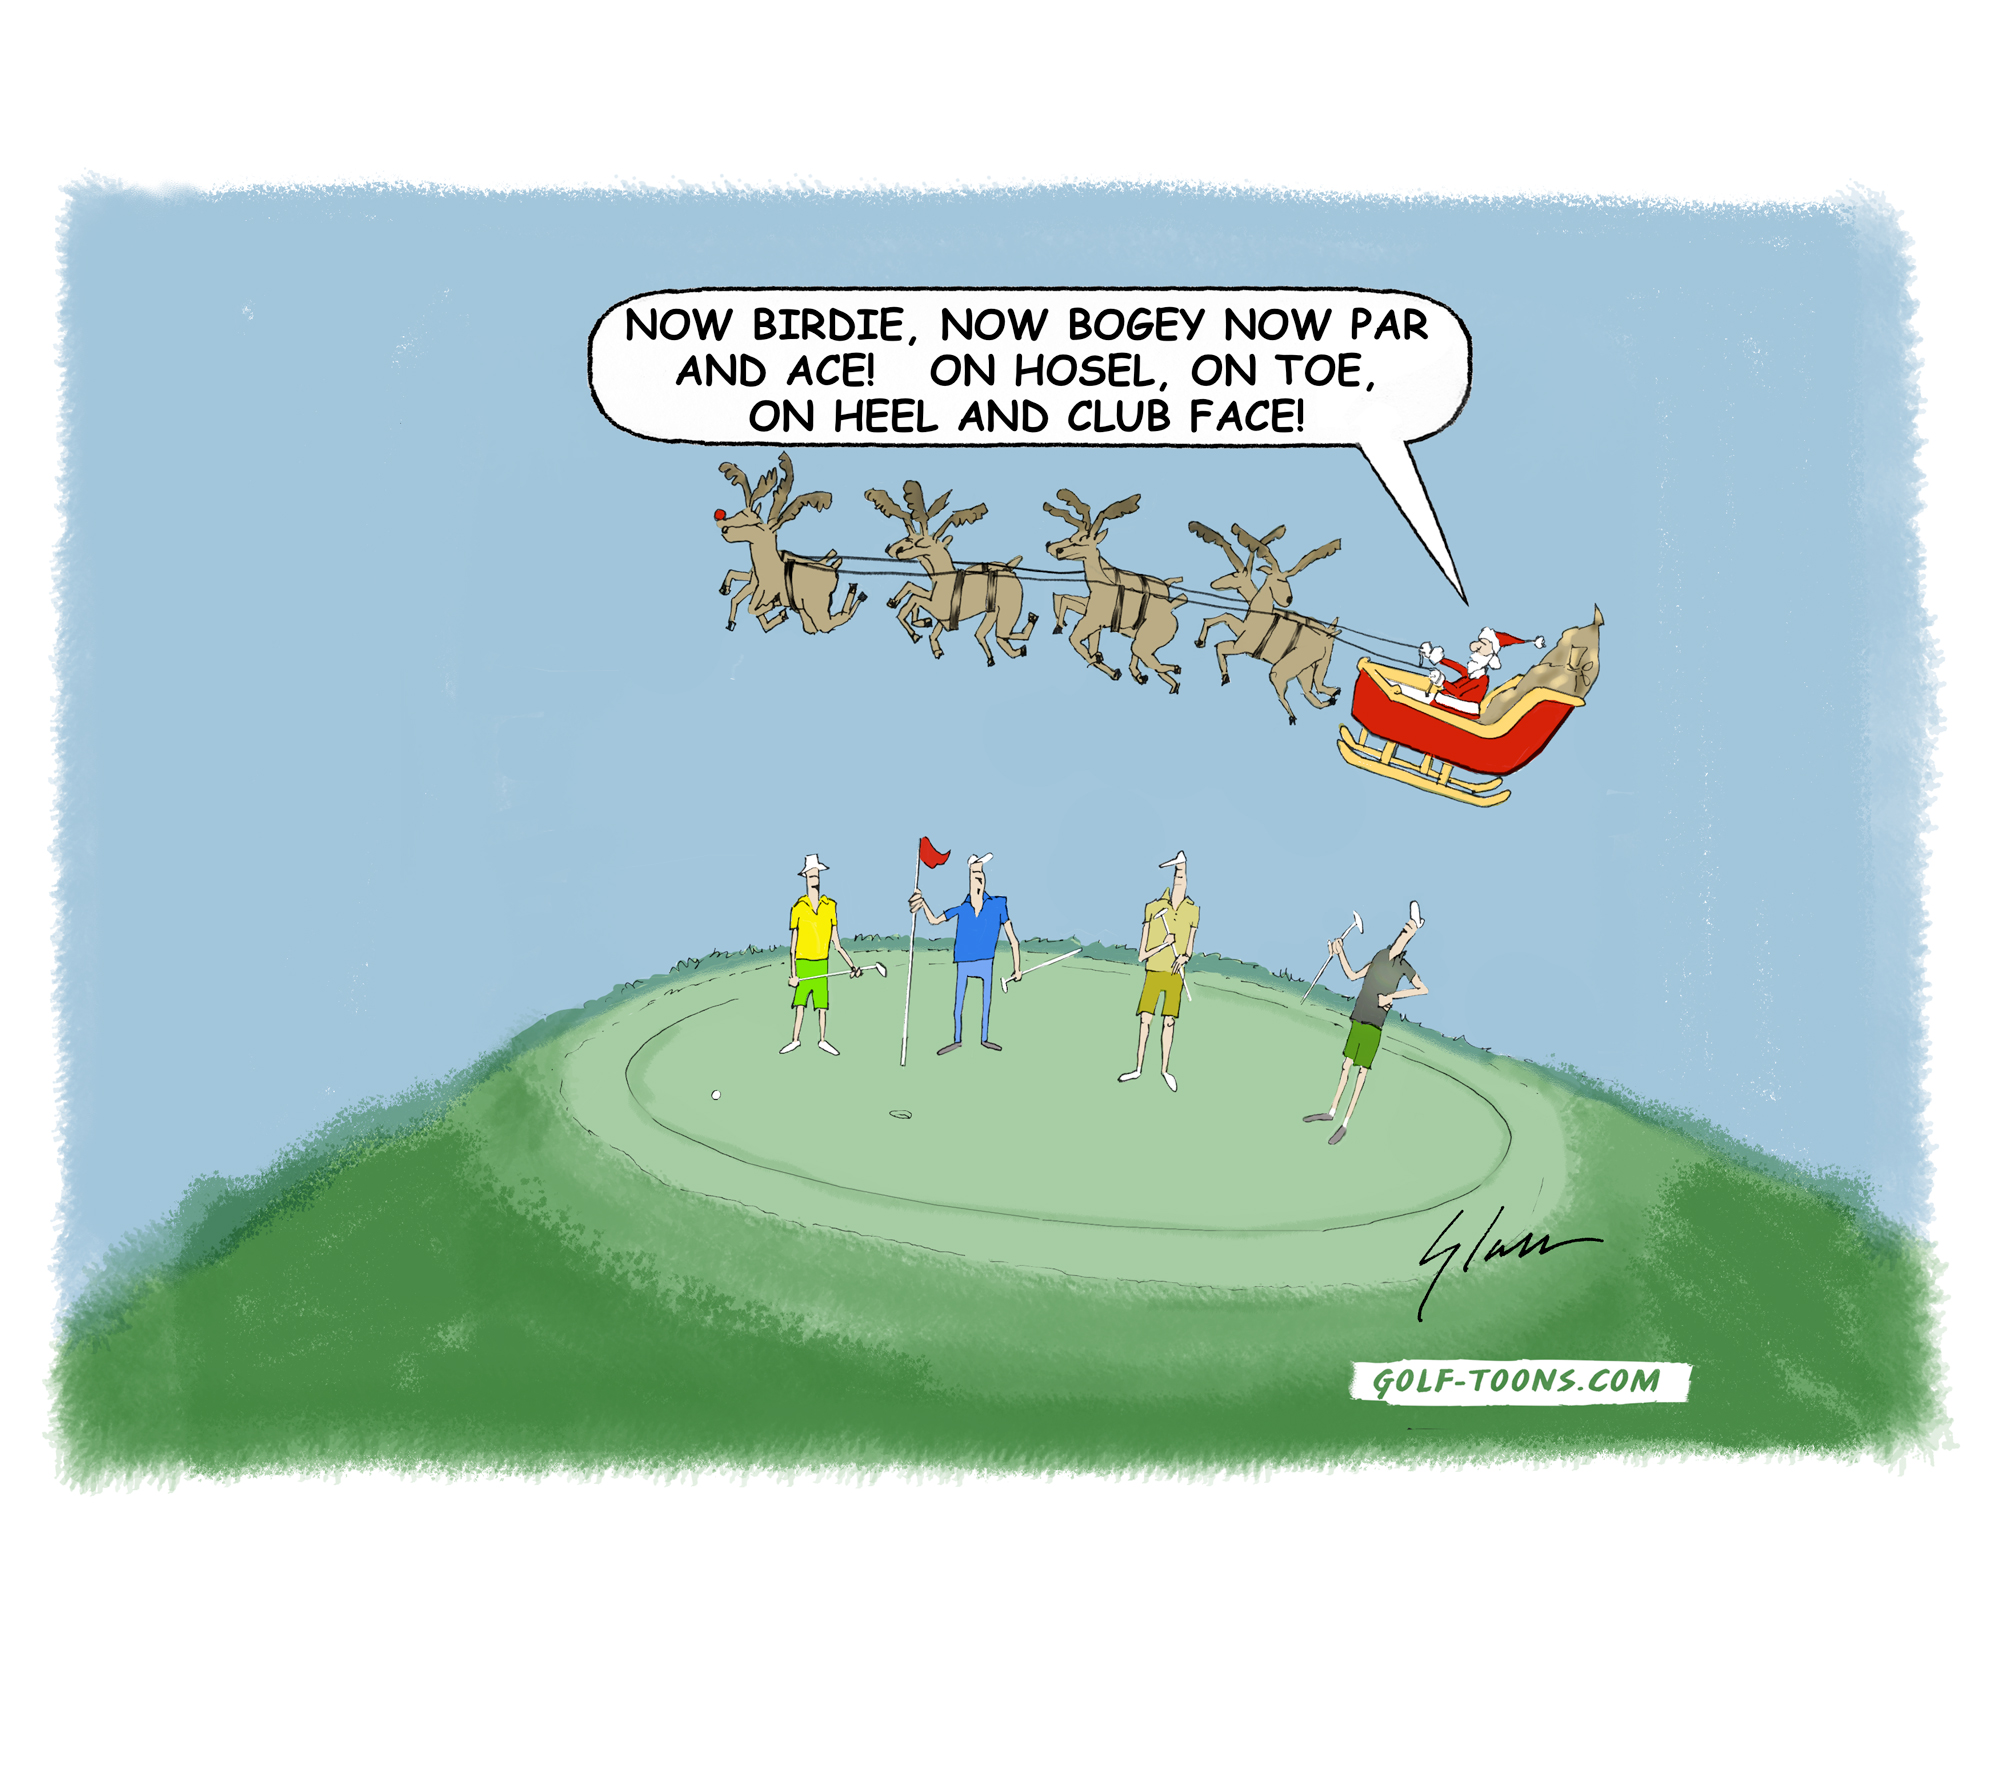 Santa on a sleigh over golfers on a putting green